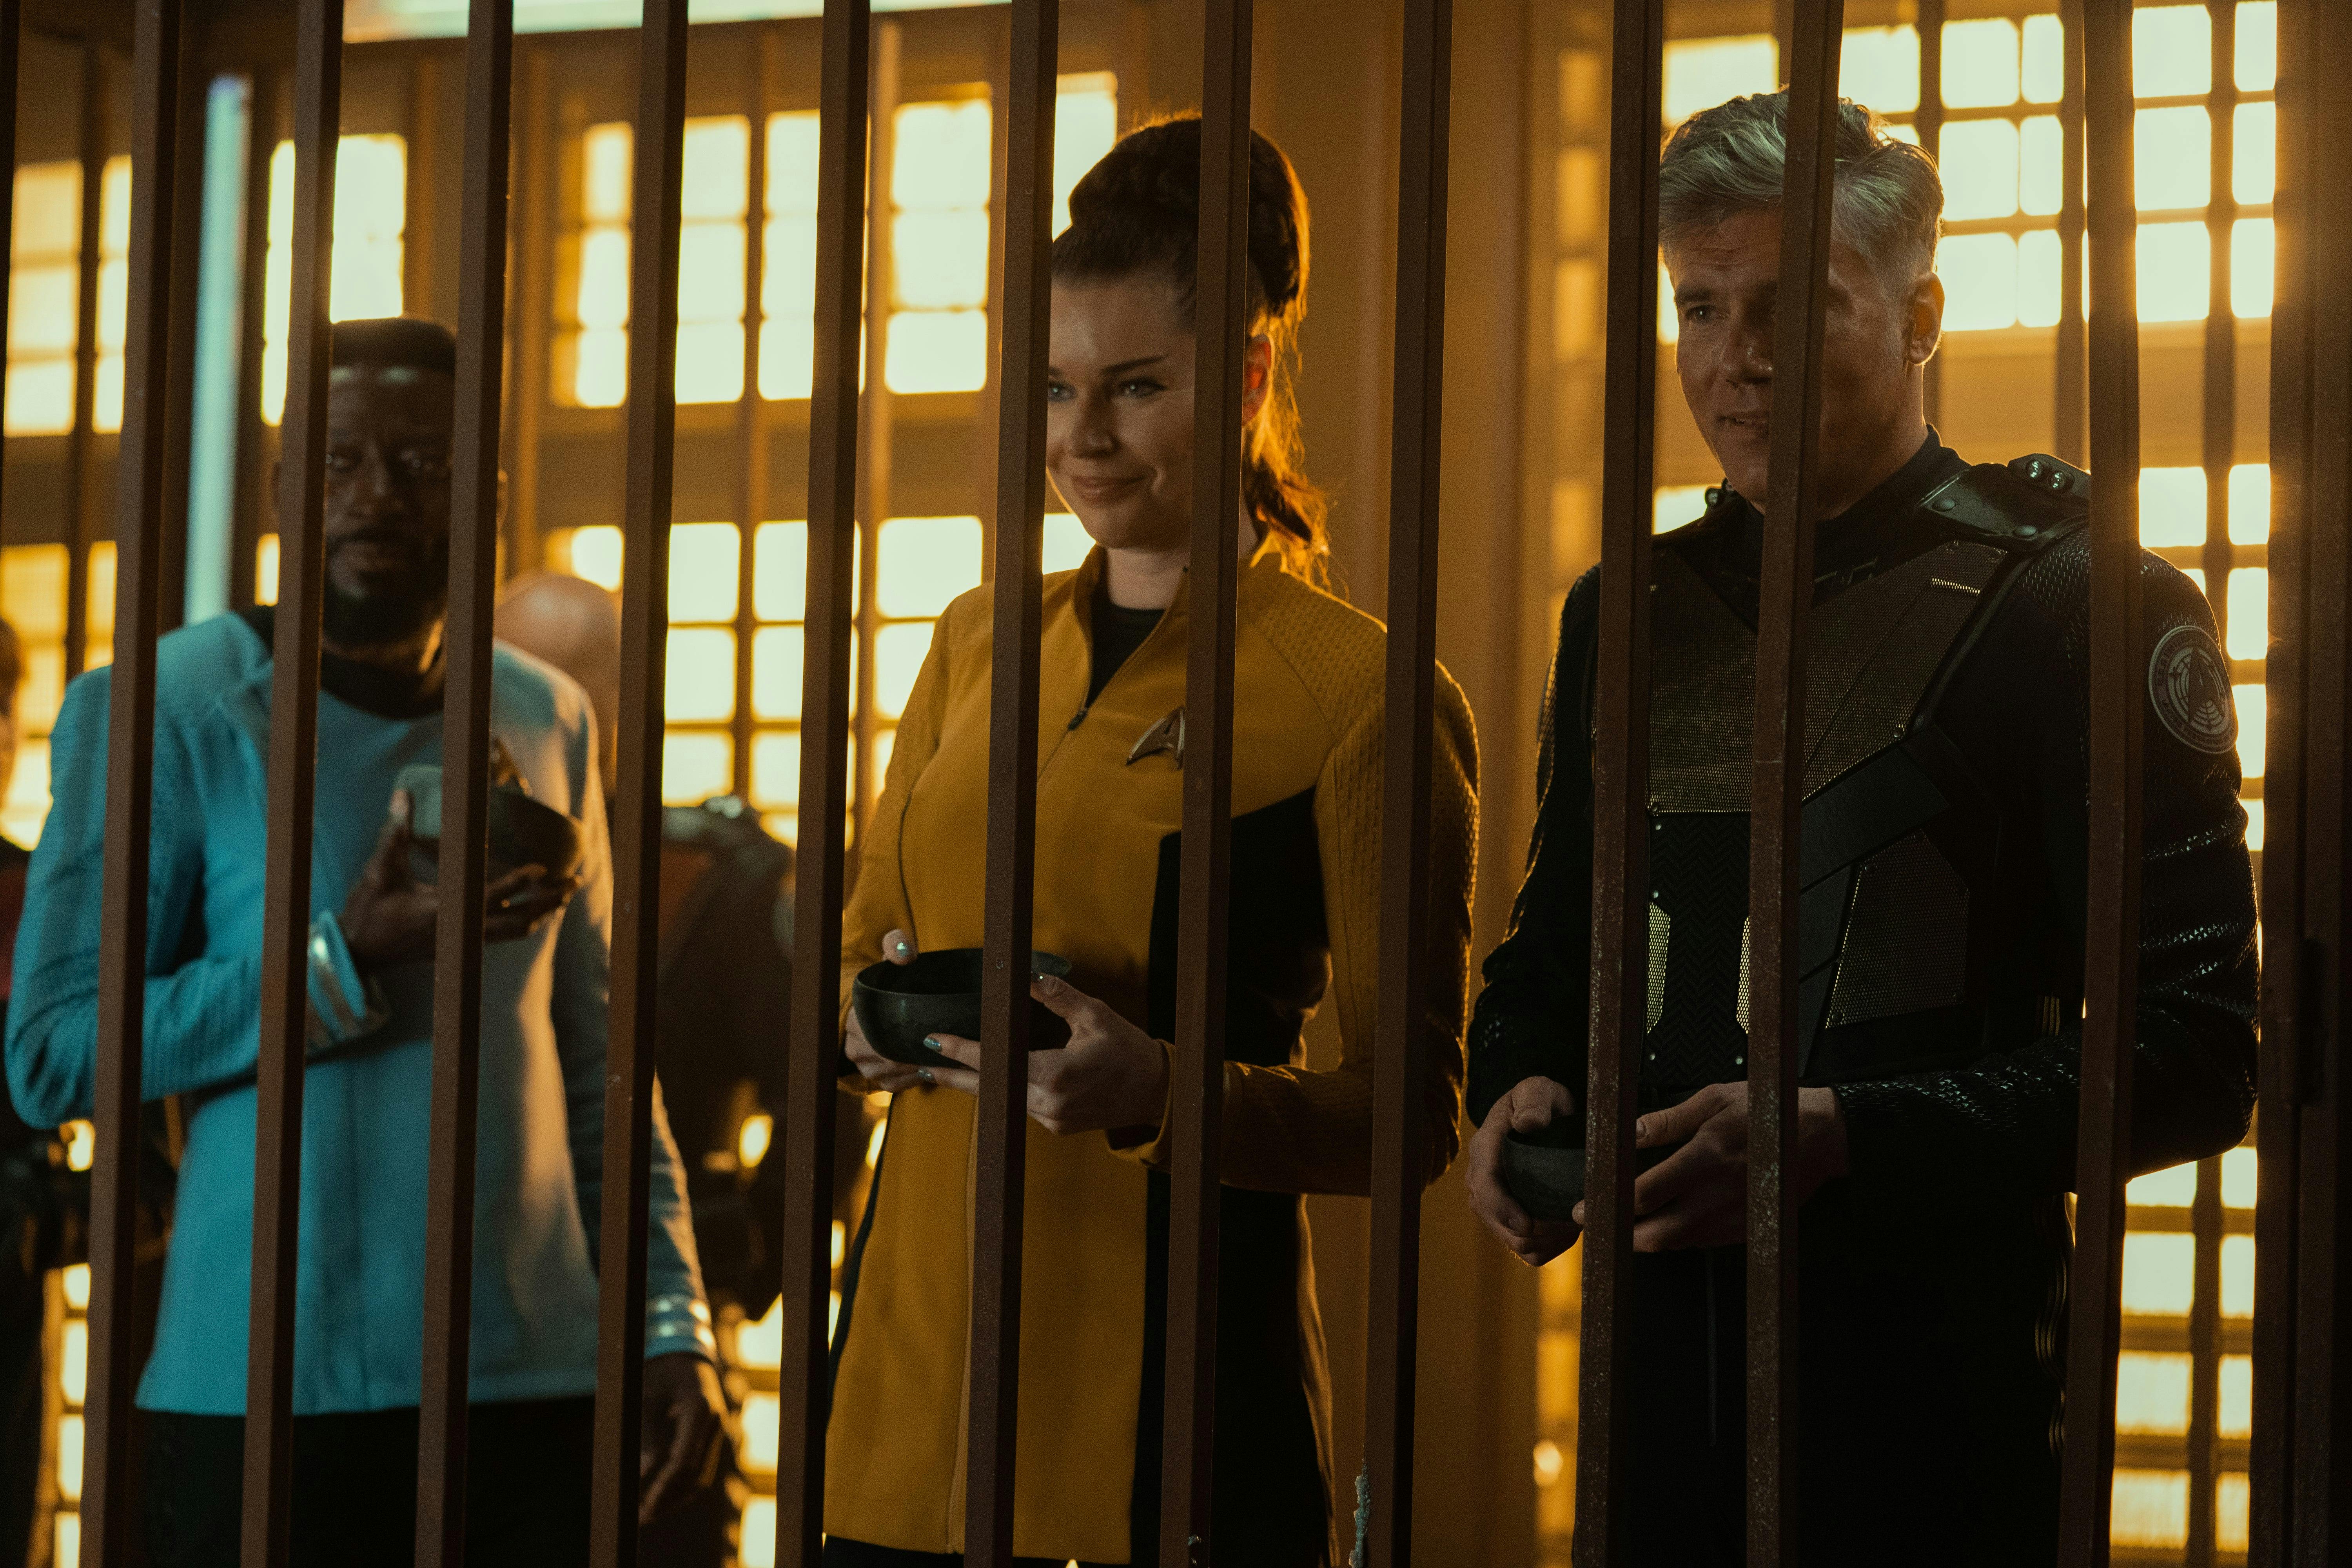 Dr. M'Benga (Babs Olusanmokun), Number One (Rebecca Romijn), and Pike (Anson Mount) stand in a prison cell.